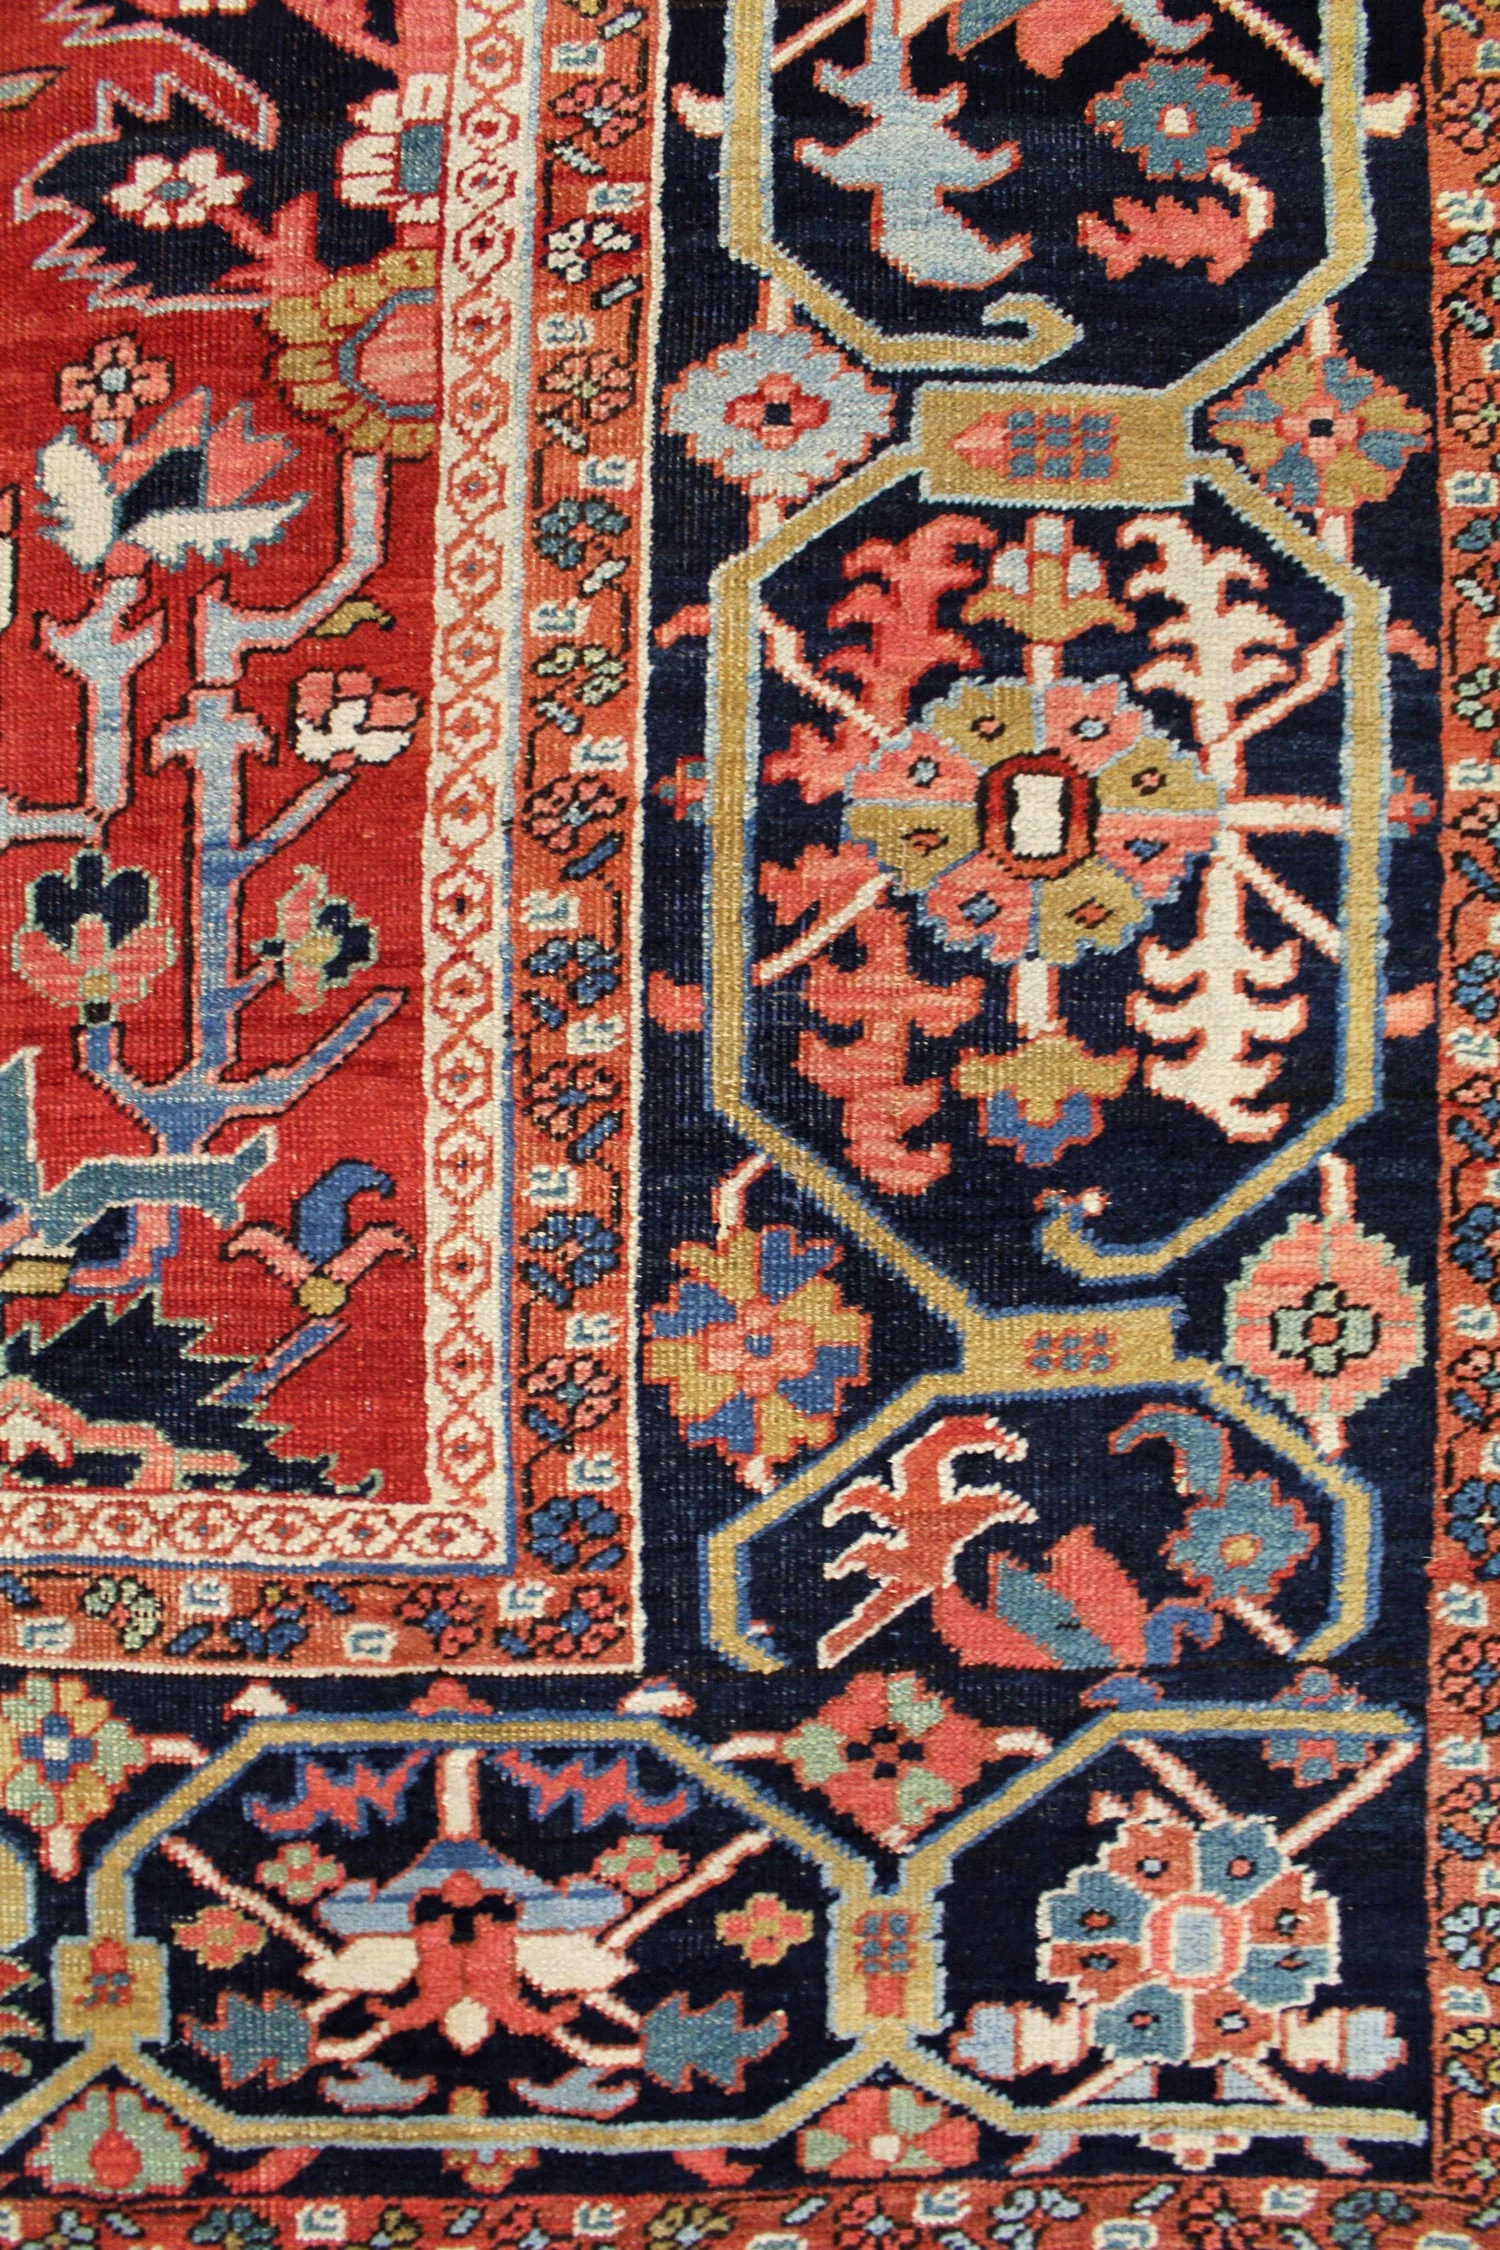 Detail of the navy blue border from an antique Persian Heriz "Serapi" carpet. The brick red field is decorated with stylized leaves and flowers and framed by a navy blue border. Douglas Stock Gallery, antique Oriental rugs and antique Persian carpets Boston,MA area